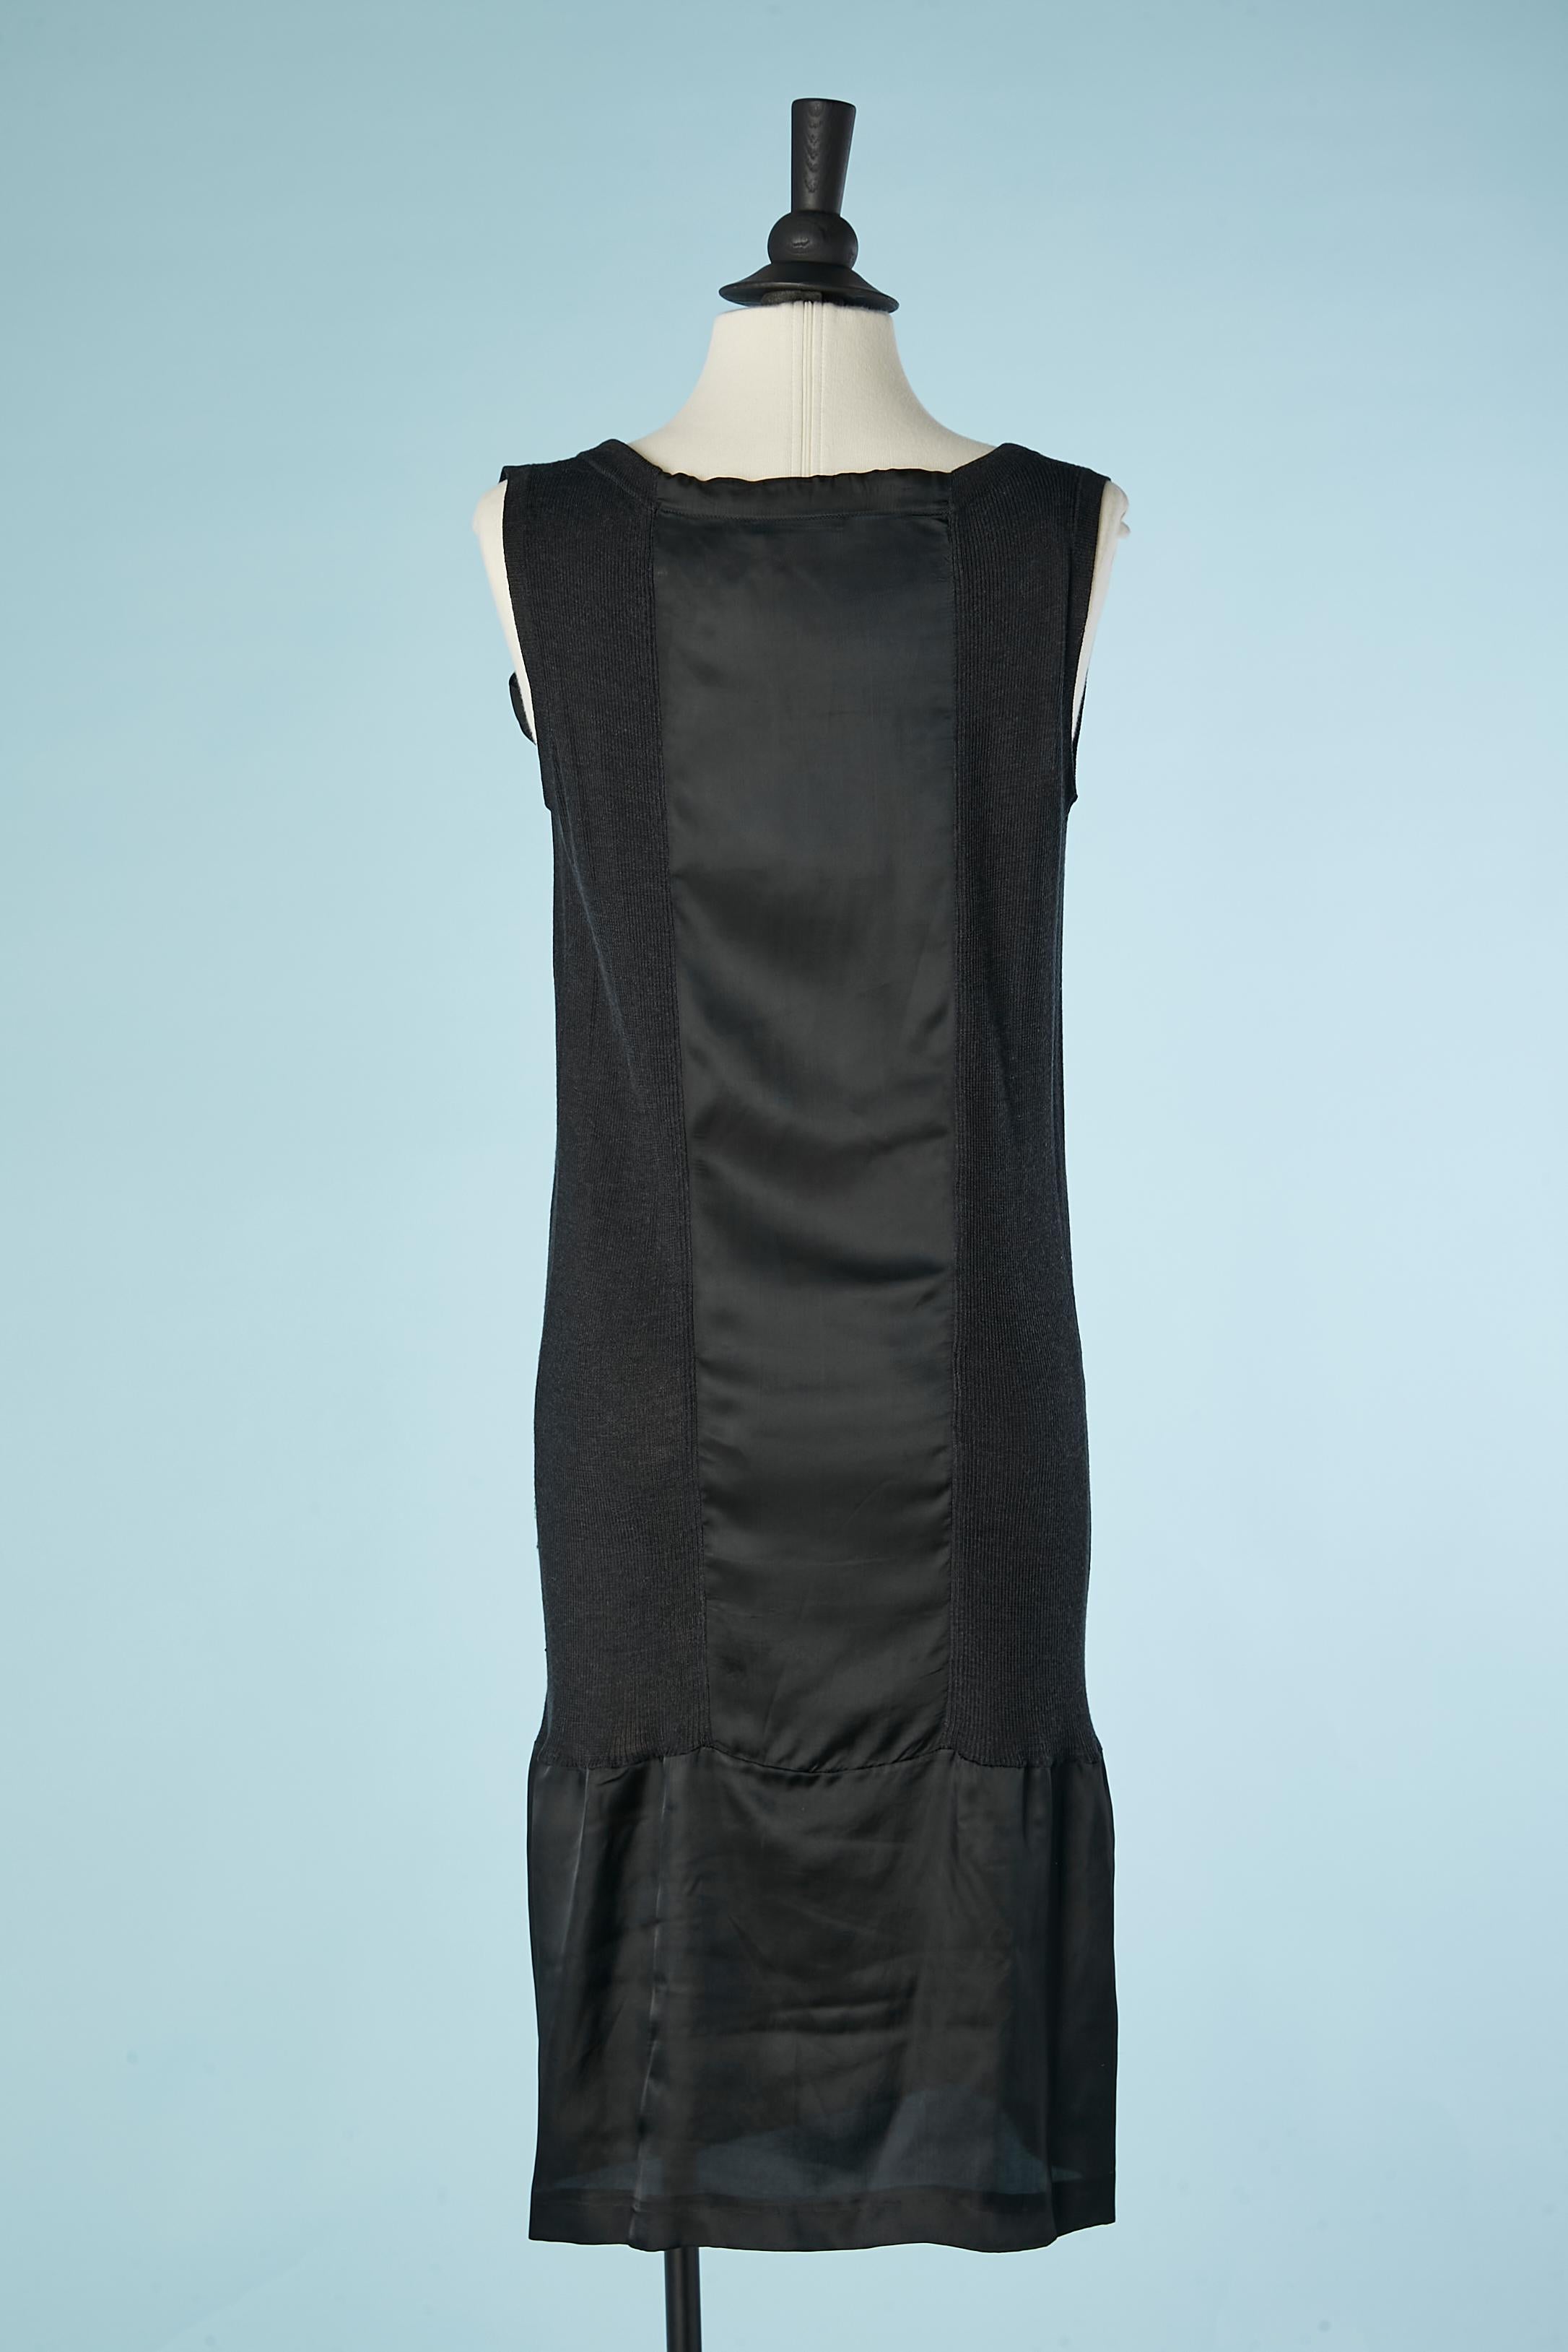 Bi-material black cocktail dress  with bow Prada  For Sale 1